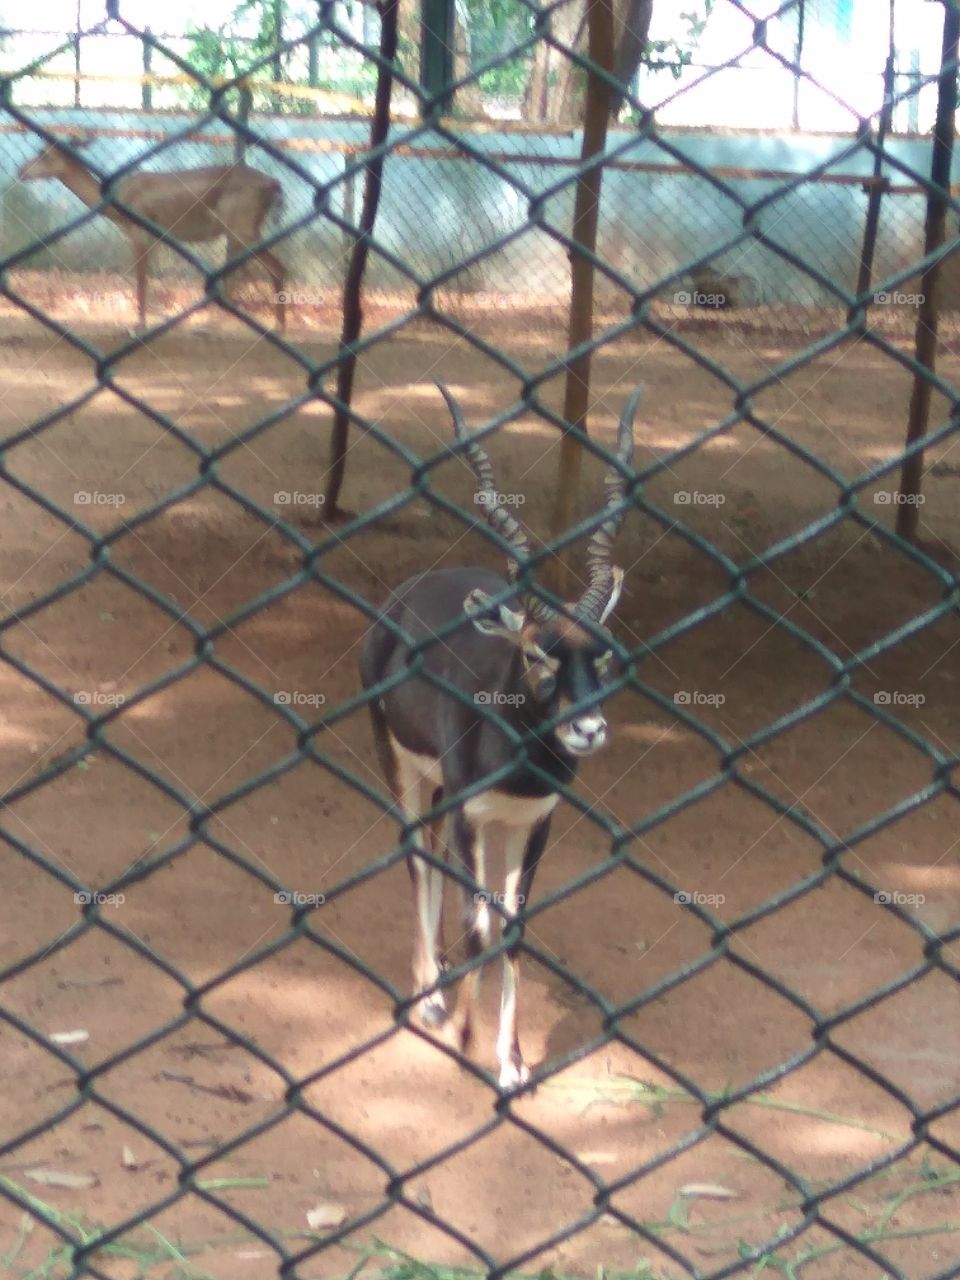 Deer at zoological park in india